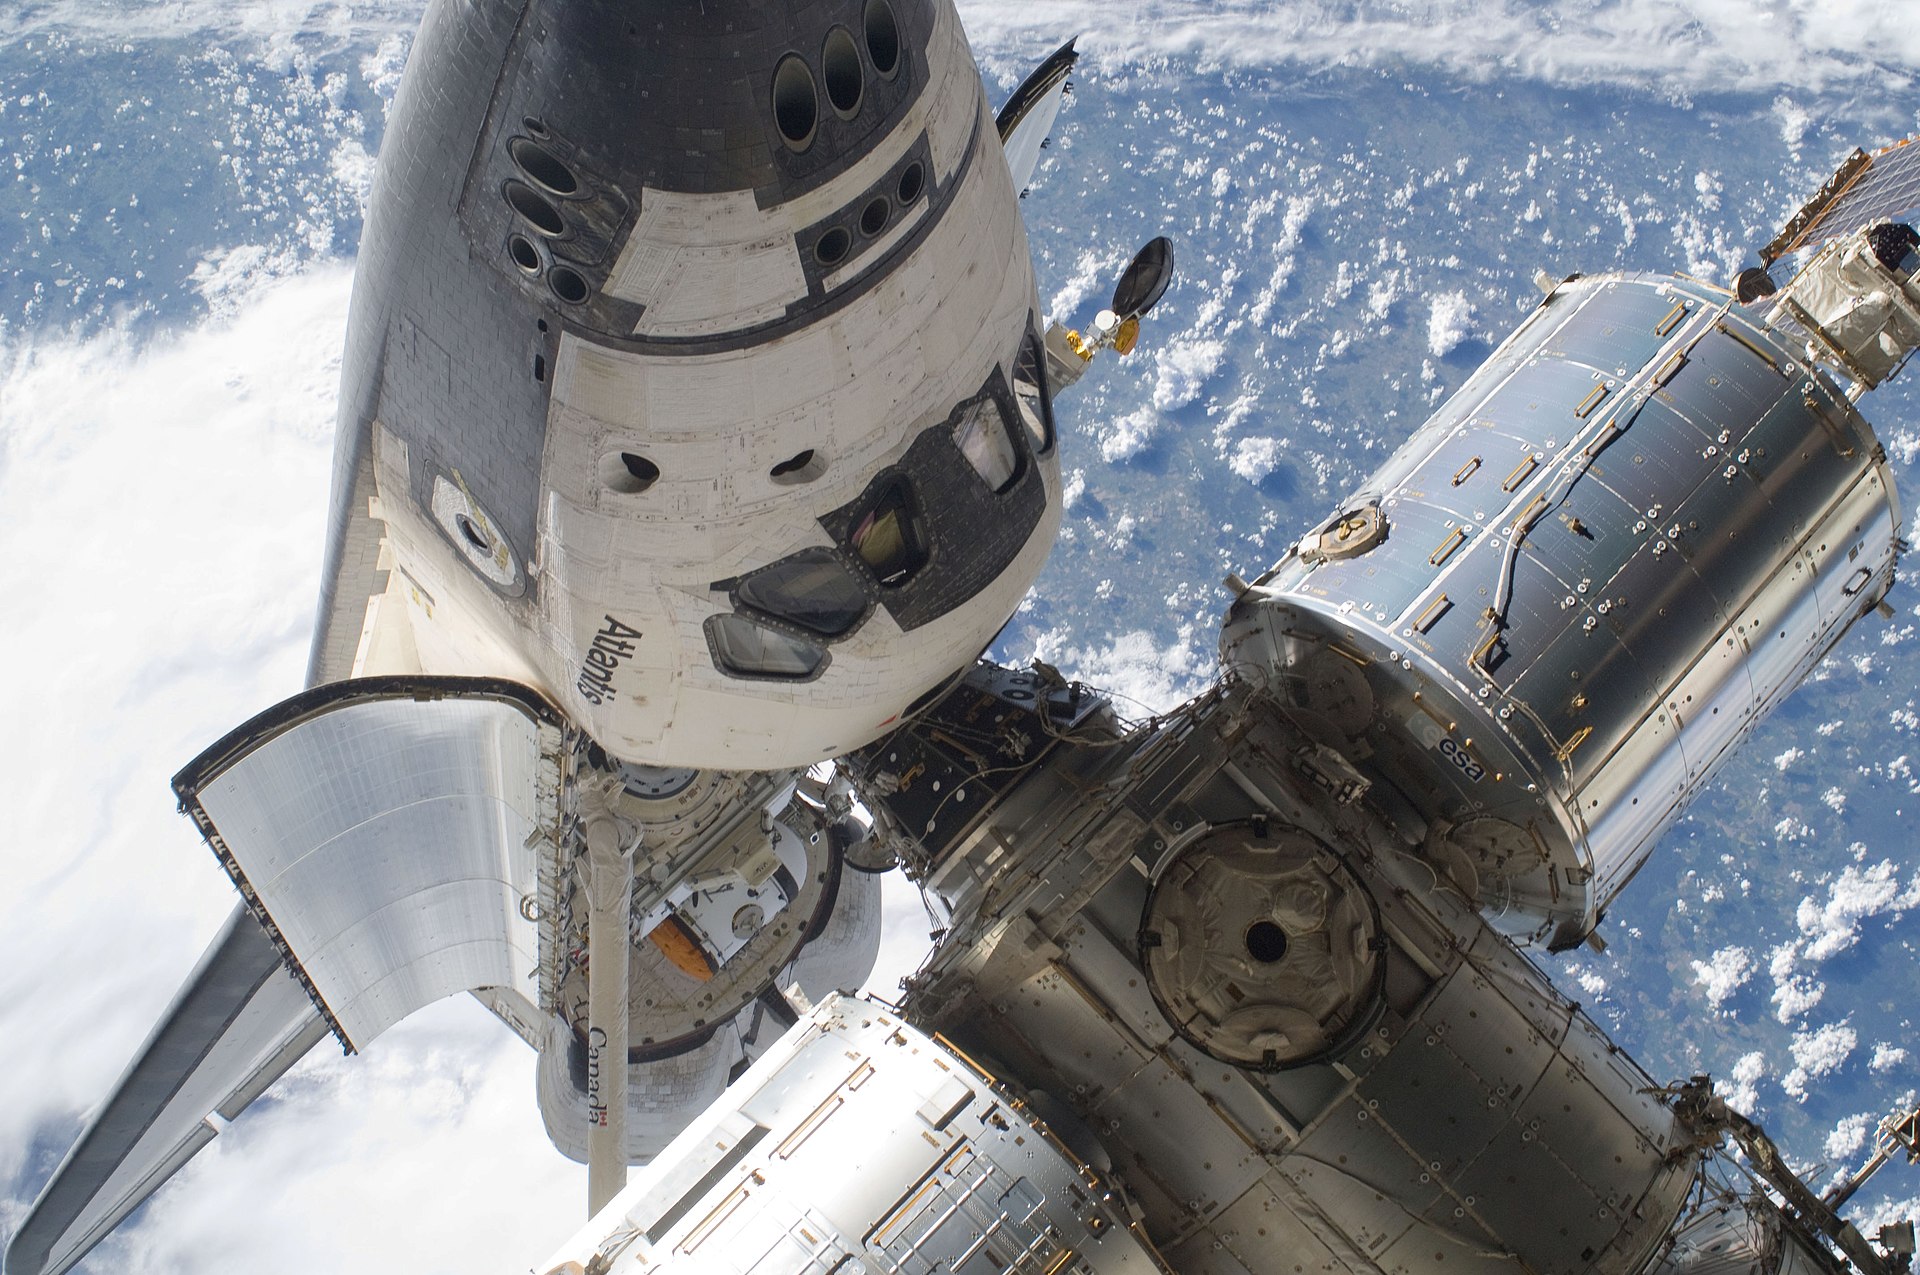 A space shuttle docked with the space station